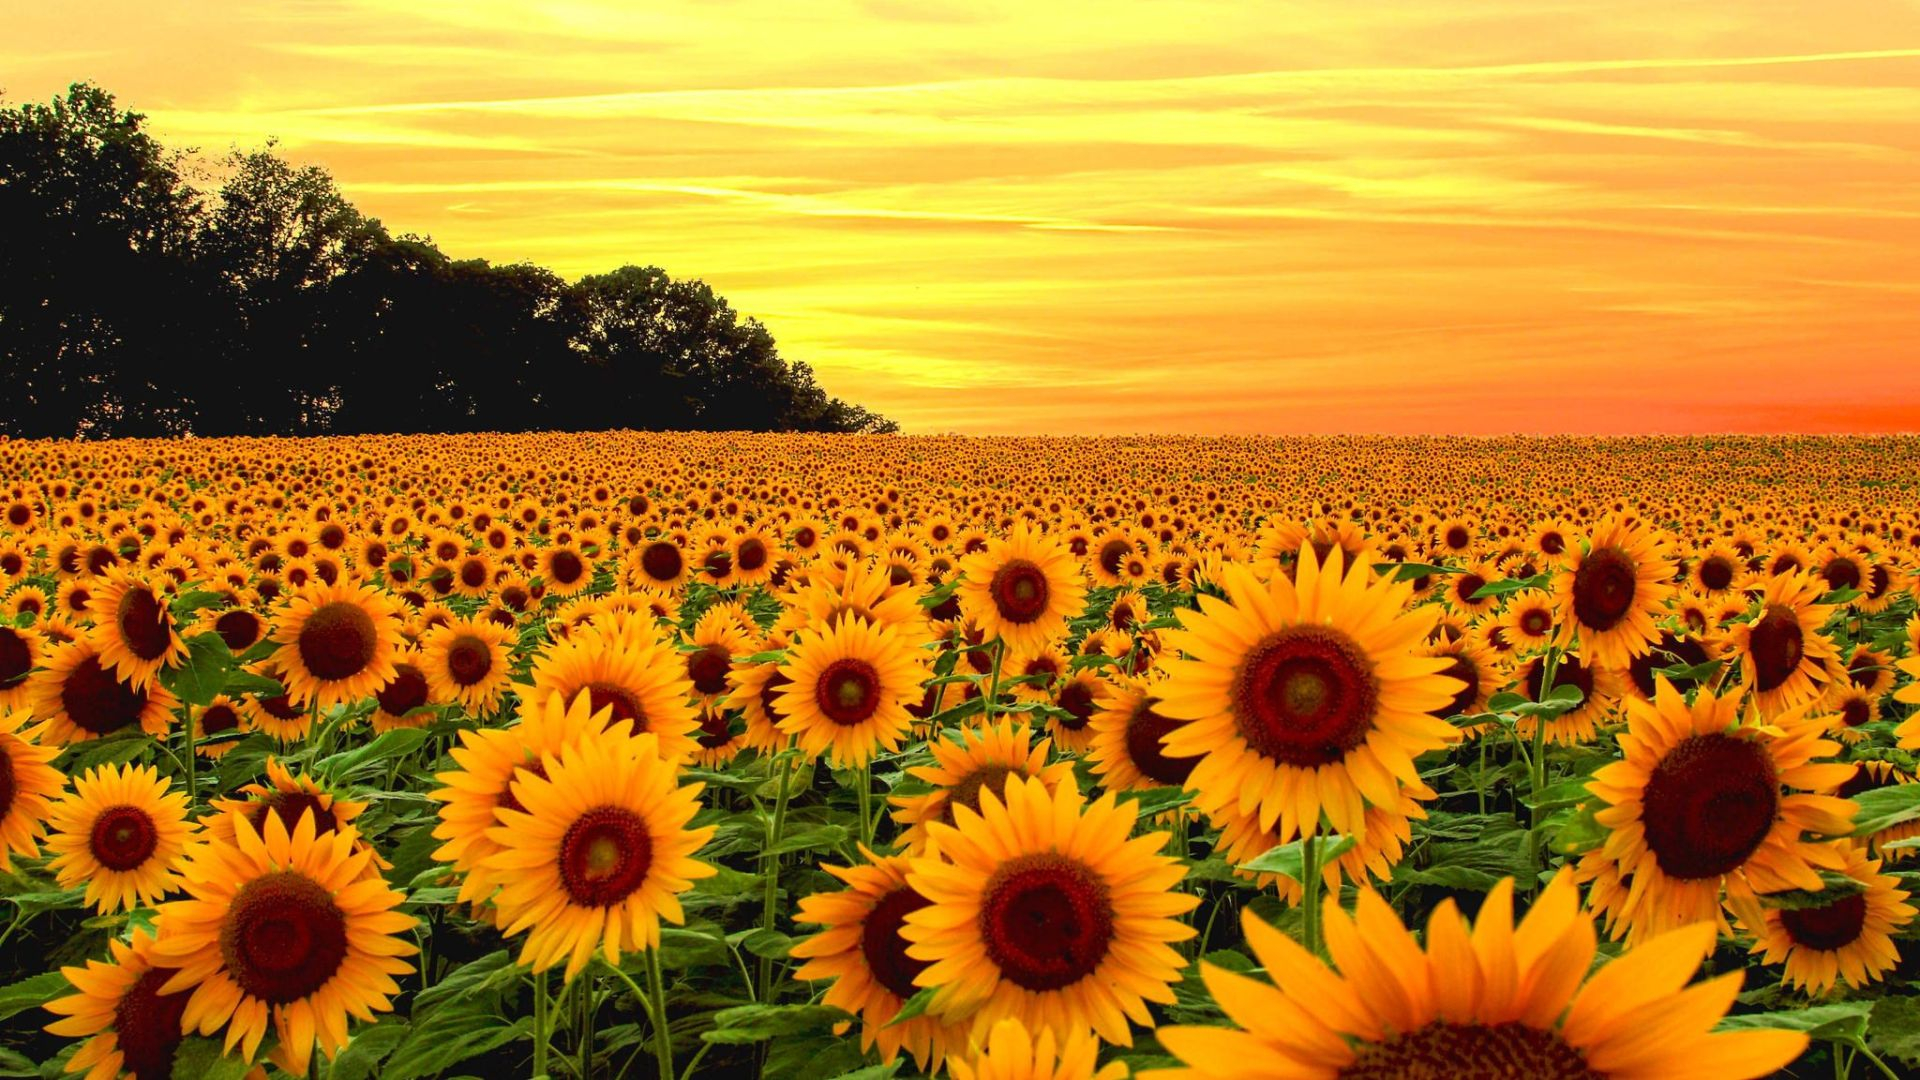 1920x1080 Sunflower Wallpaper: Top Free Sunflower Backgrounds, Pictures \u0026 Images Download